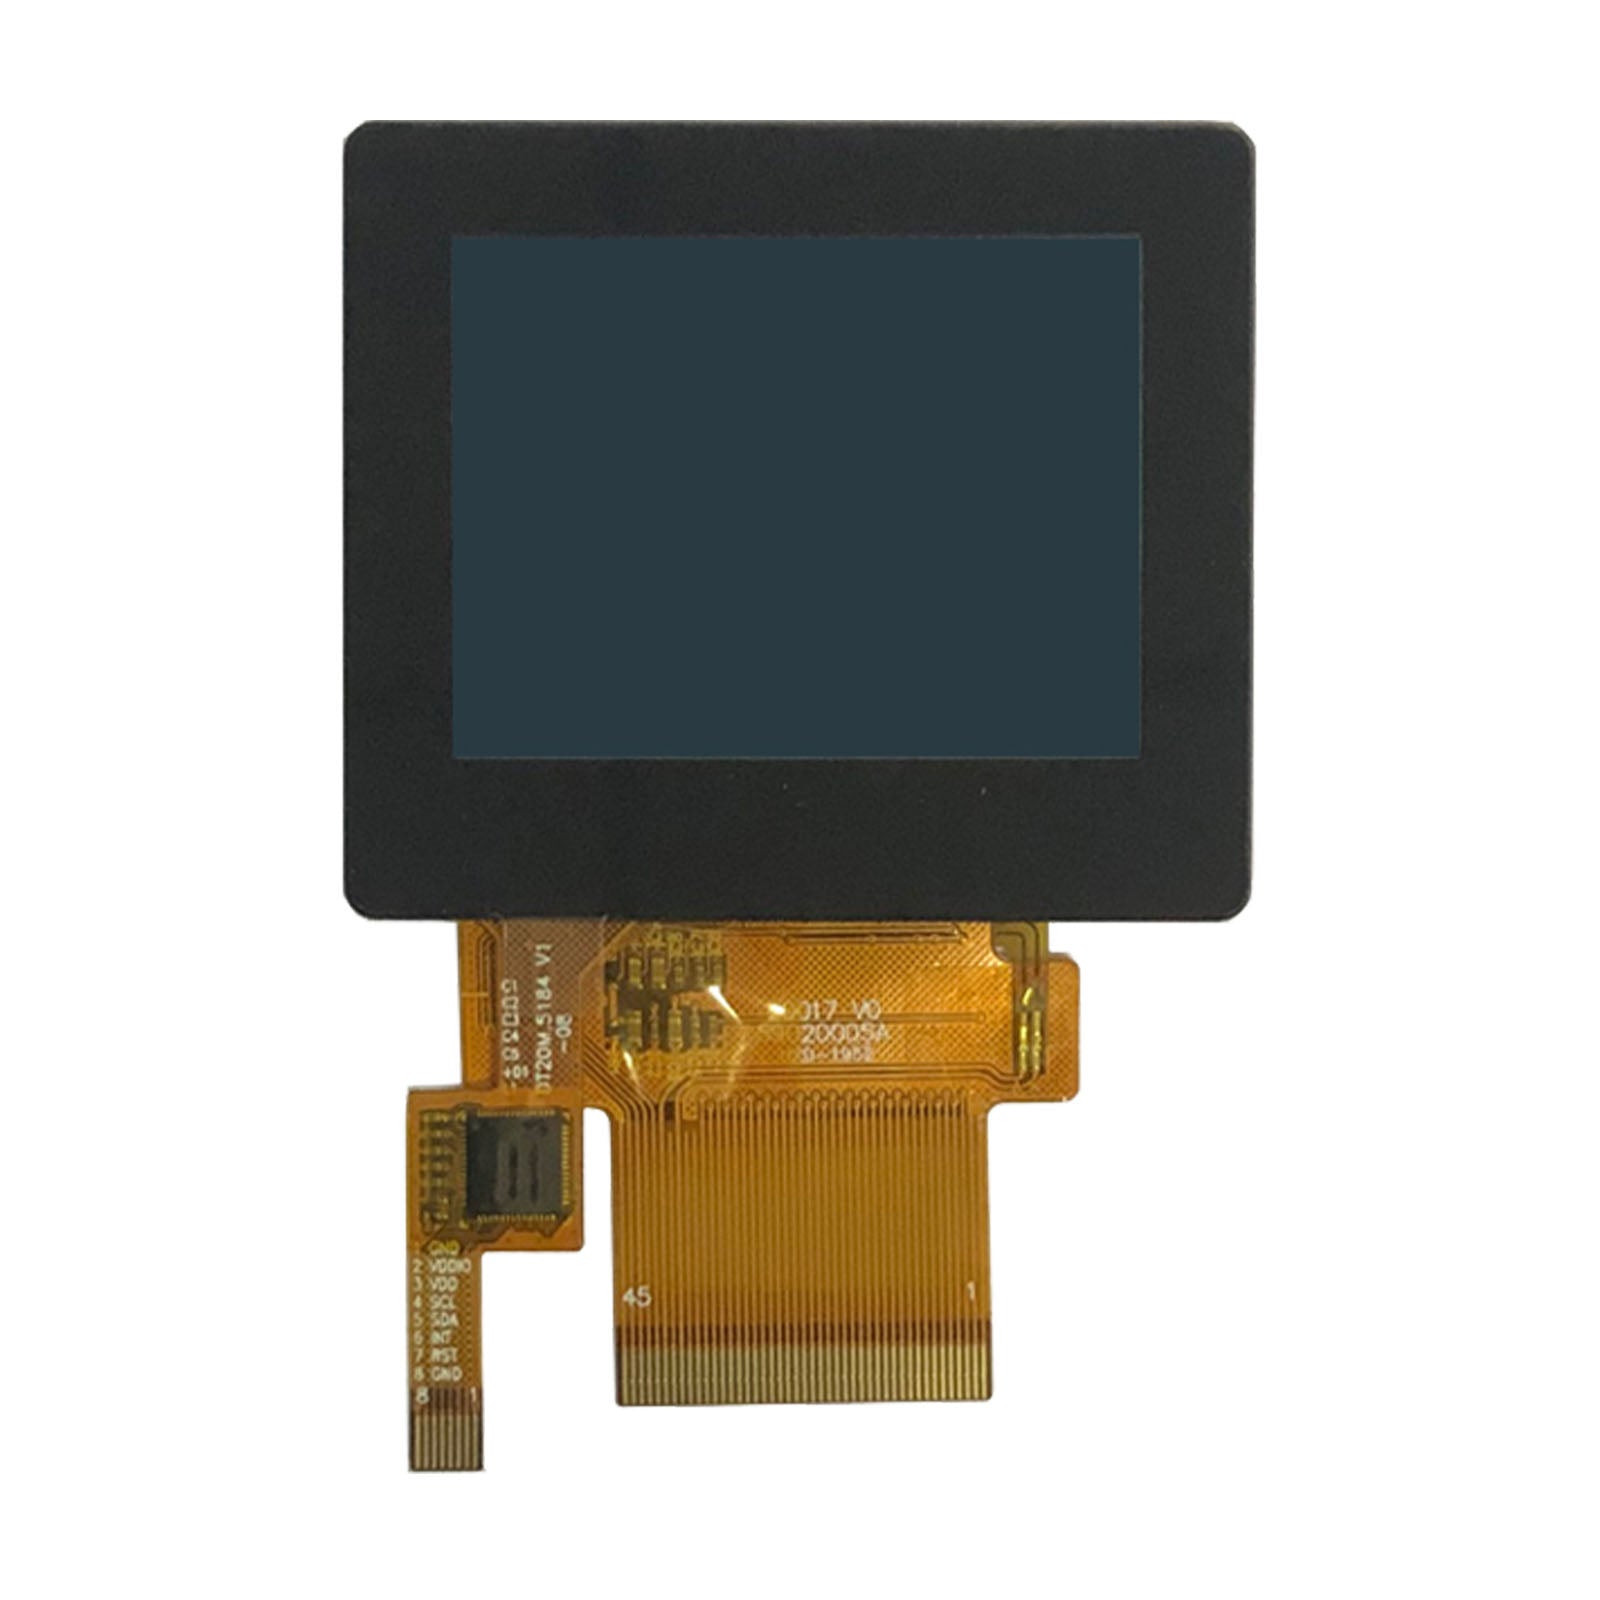 2.0 inch 320x240 TFT transflective display with capacitive touch, MCU, SPI, and RGB interfaces